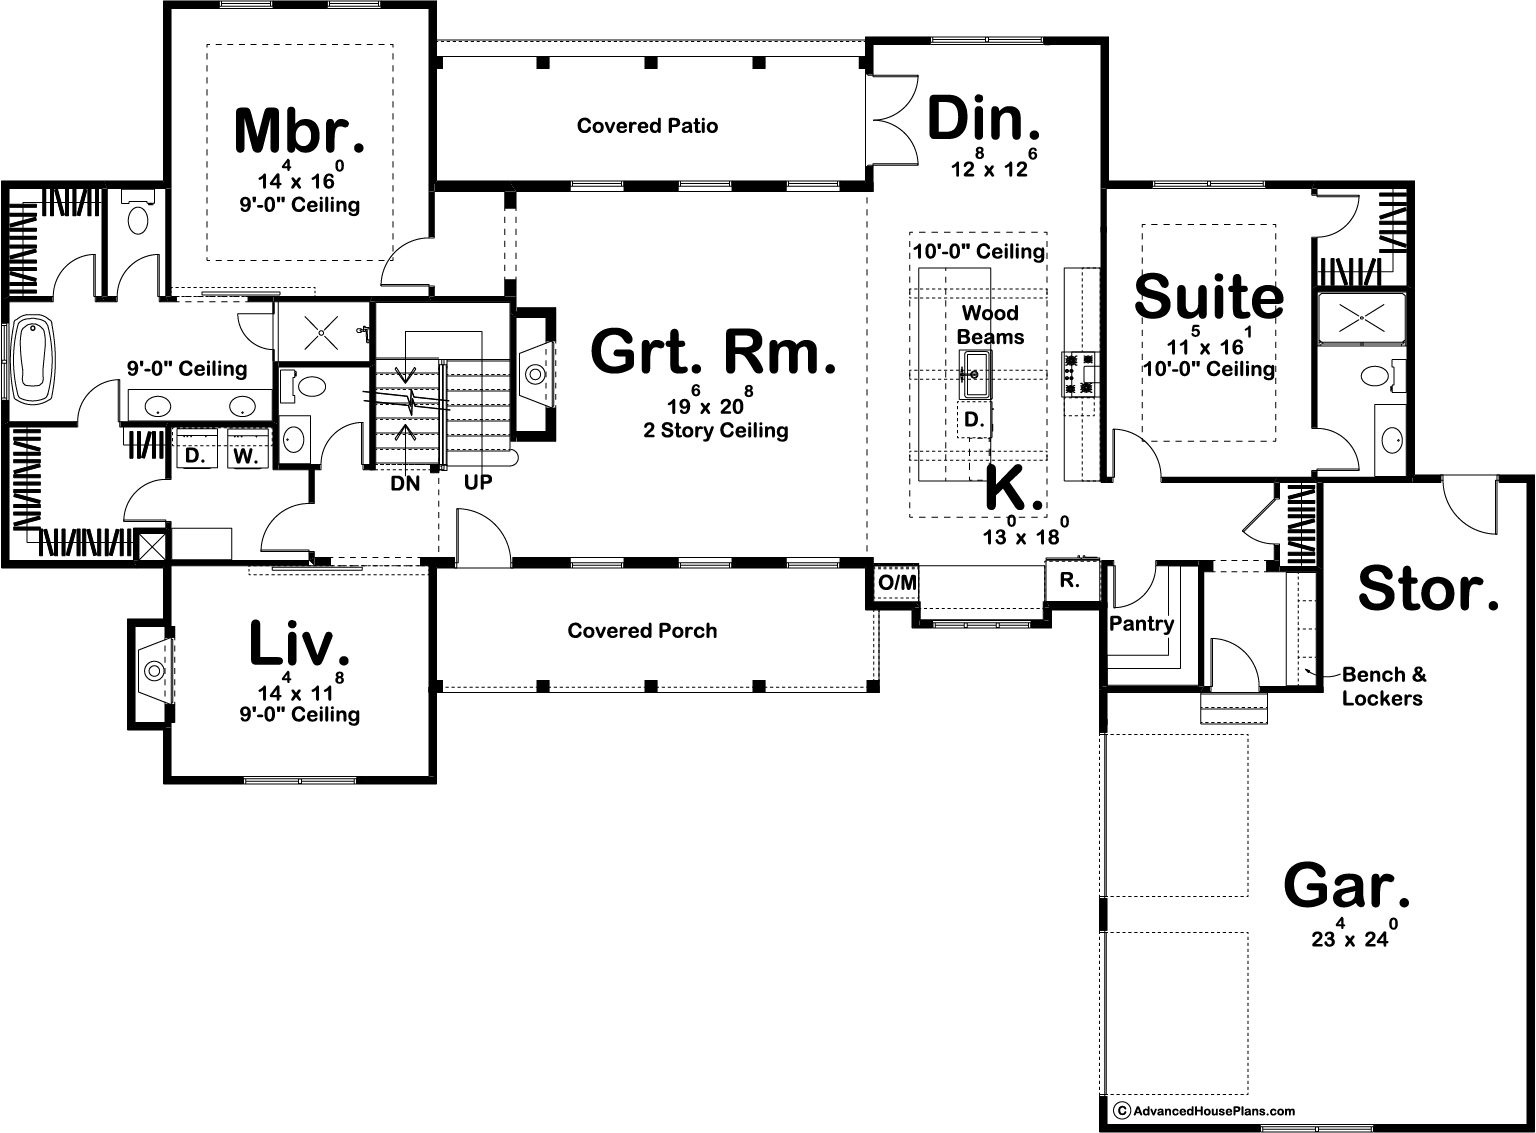 Two Master Bedrooms, The Floor Plan Feature That Promises A Good Nights